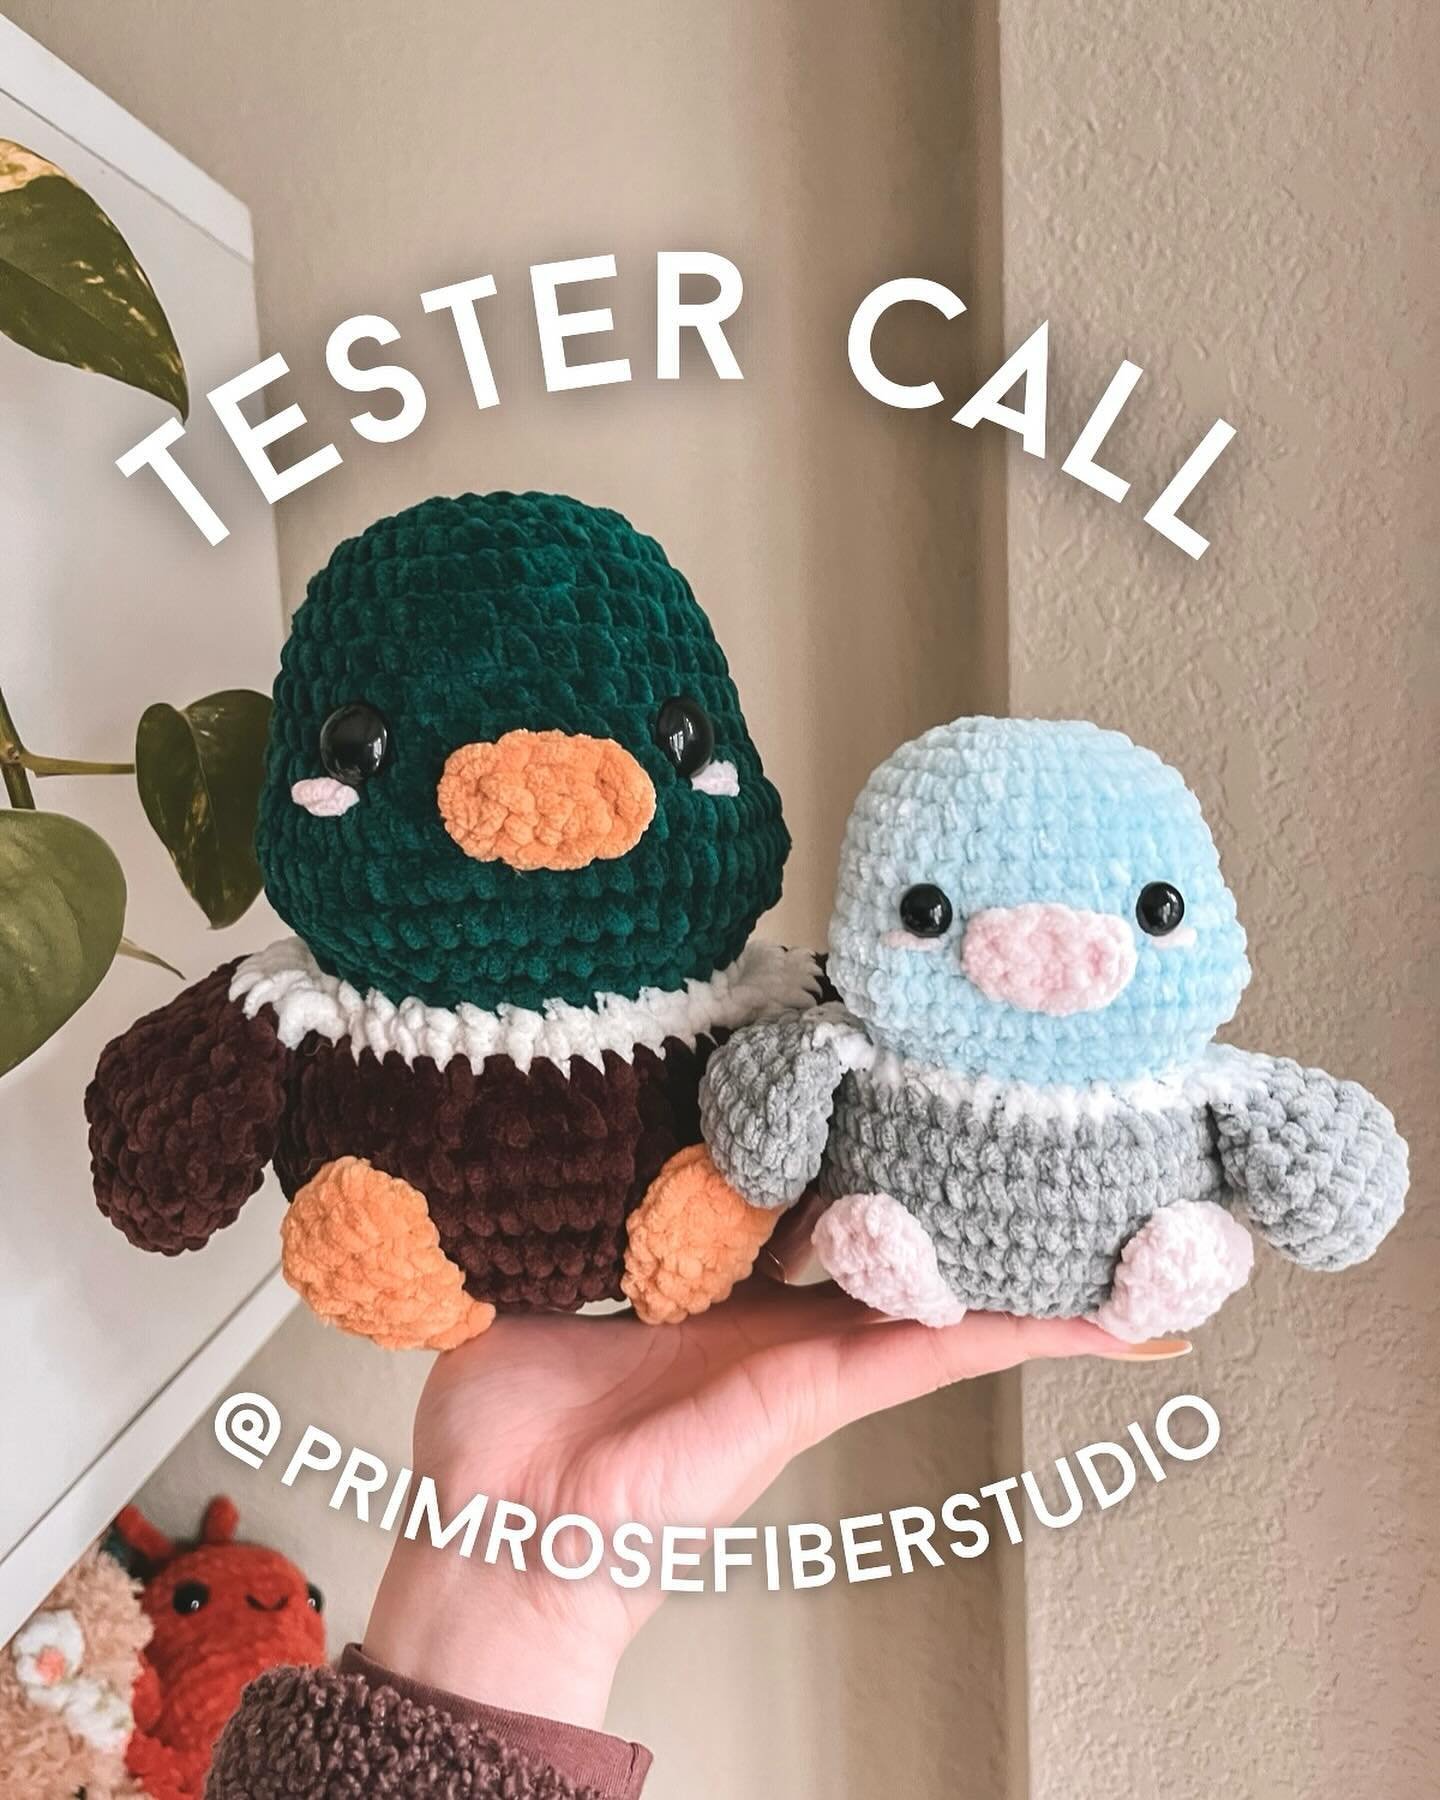 (OPEN) Chonky Birdies Tester Call 🦆🐦🐥🐓🦅

I made a low-sew CHONKY mallard pattern. I&rsquo;m in love with his chubby cheeks and even chubbier body 🥹 This pattern&rsquo;s colorwork can also be altered to make ANY bird you can think of!! I&rsquo;m